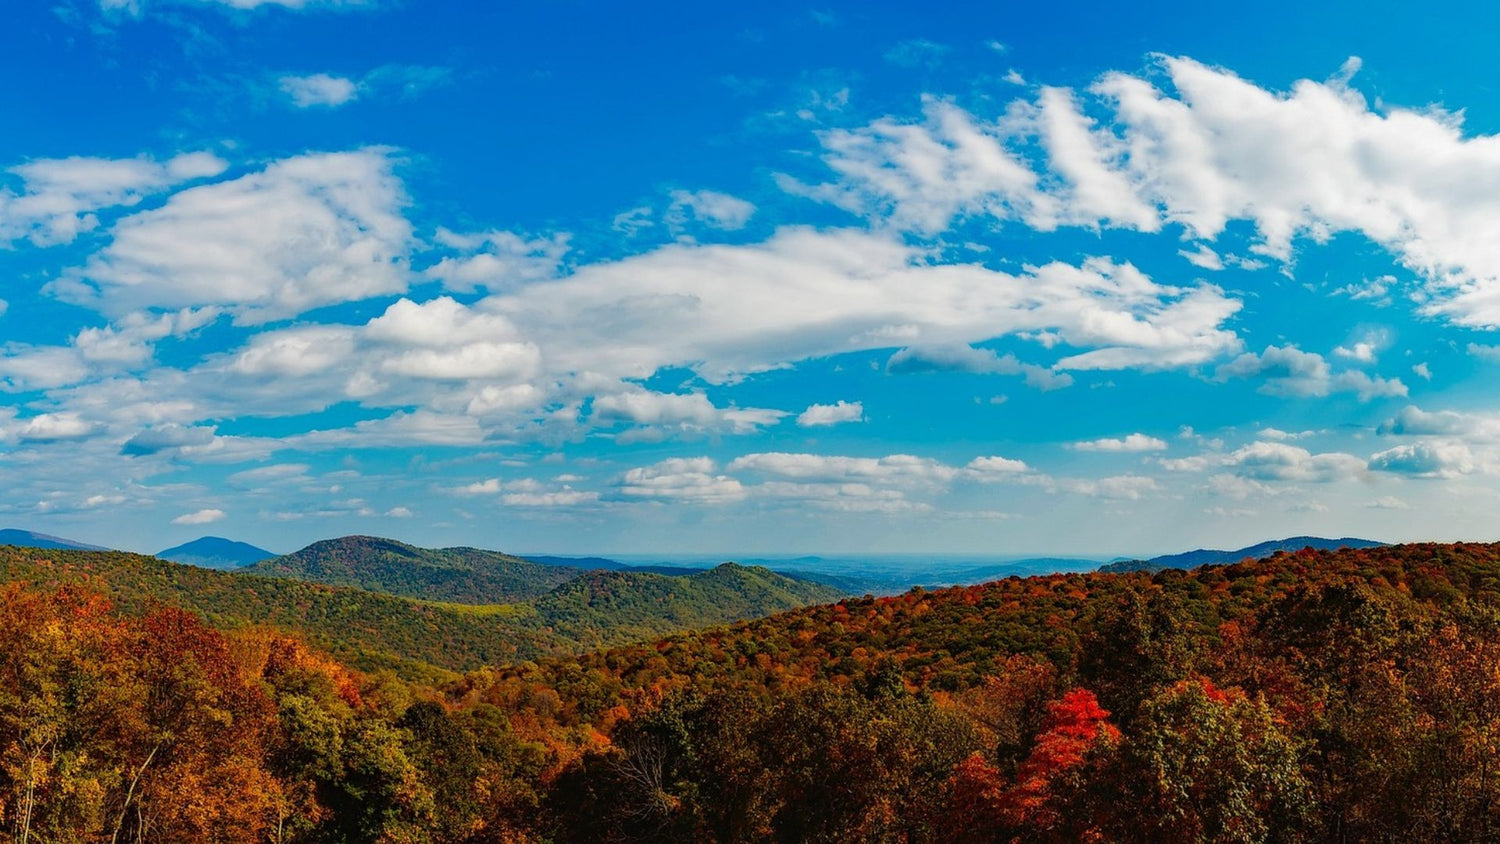 The Blue Ridge Mountains under the blue skies. - History By Mail